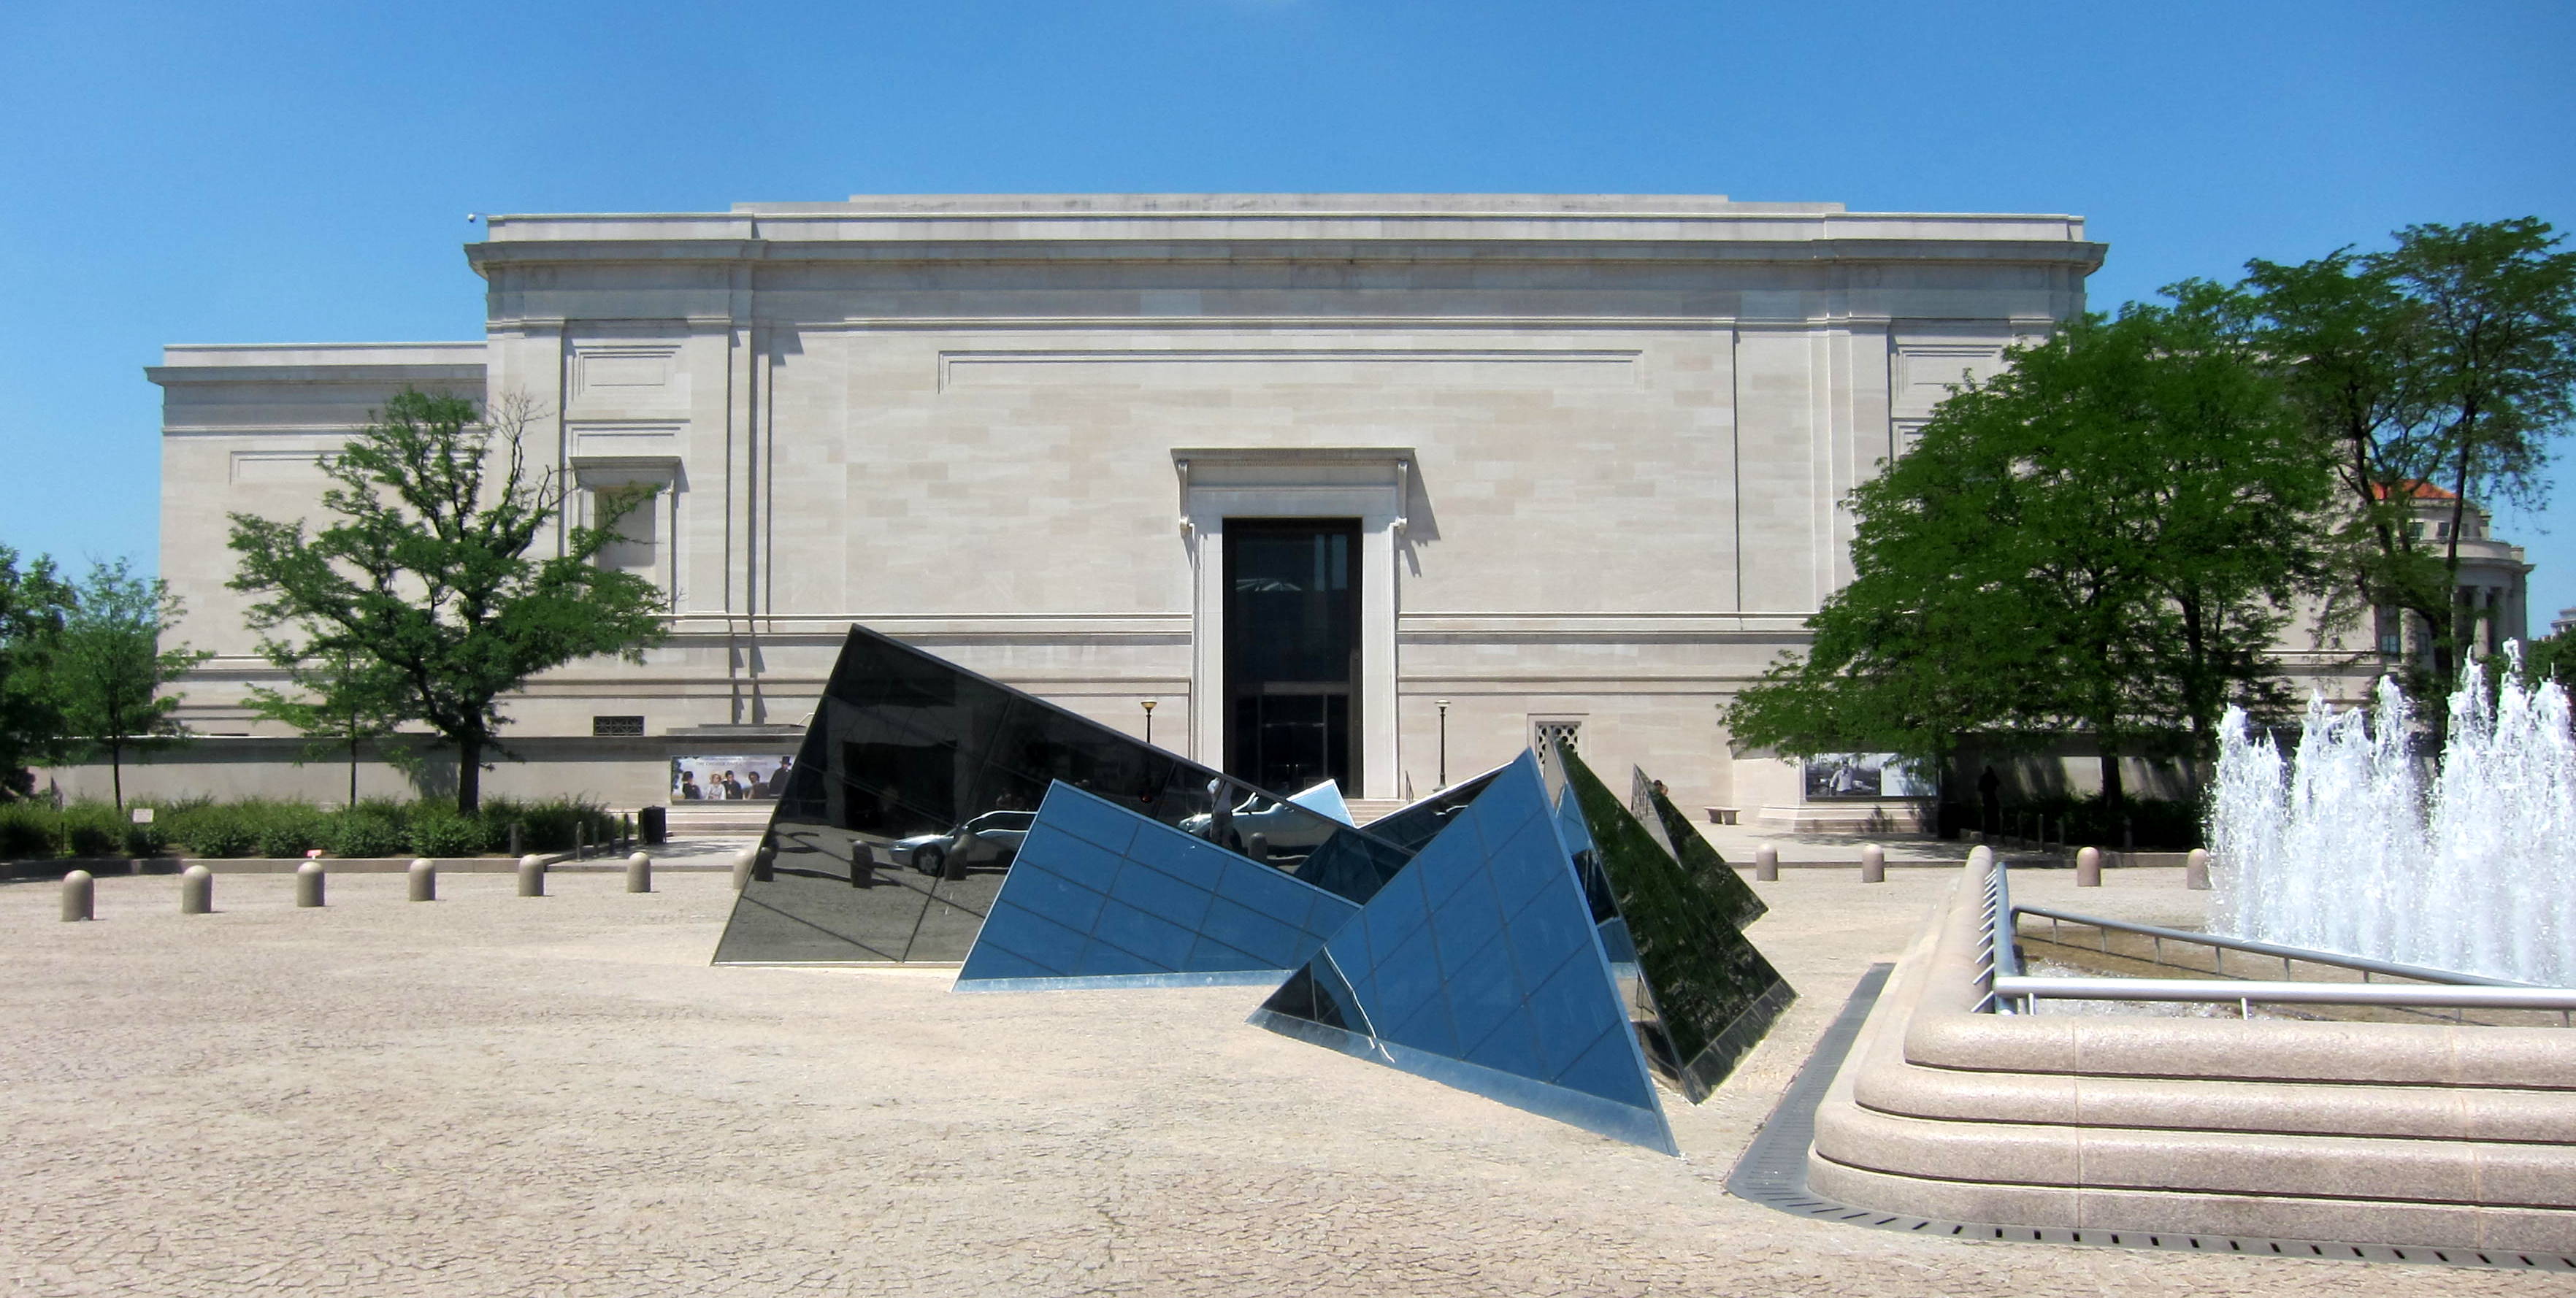 A photograph of the west building of the National Gallery of Art in Washington, D.C. West Building of the National Gallery of Art by AgnosticPreachersKid, CC BY-SA 3.0
